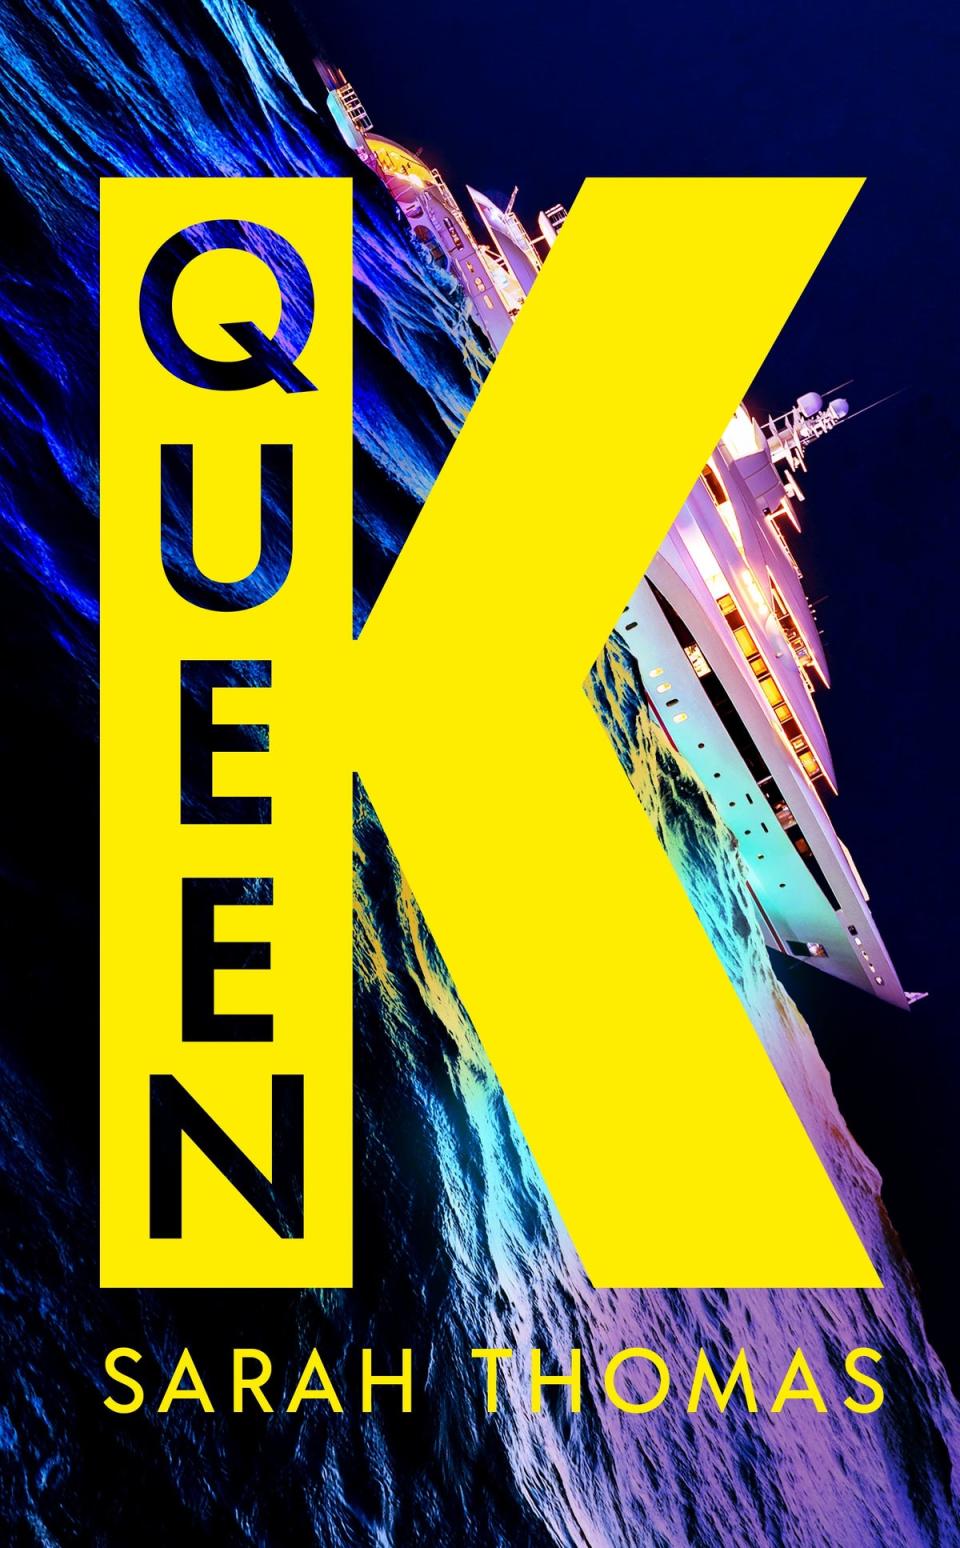 Queen K by Sarah Thomas (Serpent’s Tail)